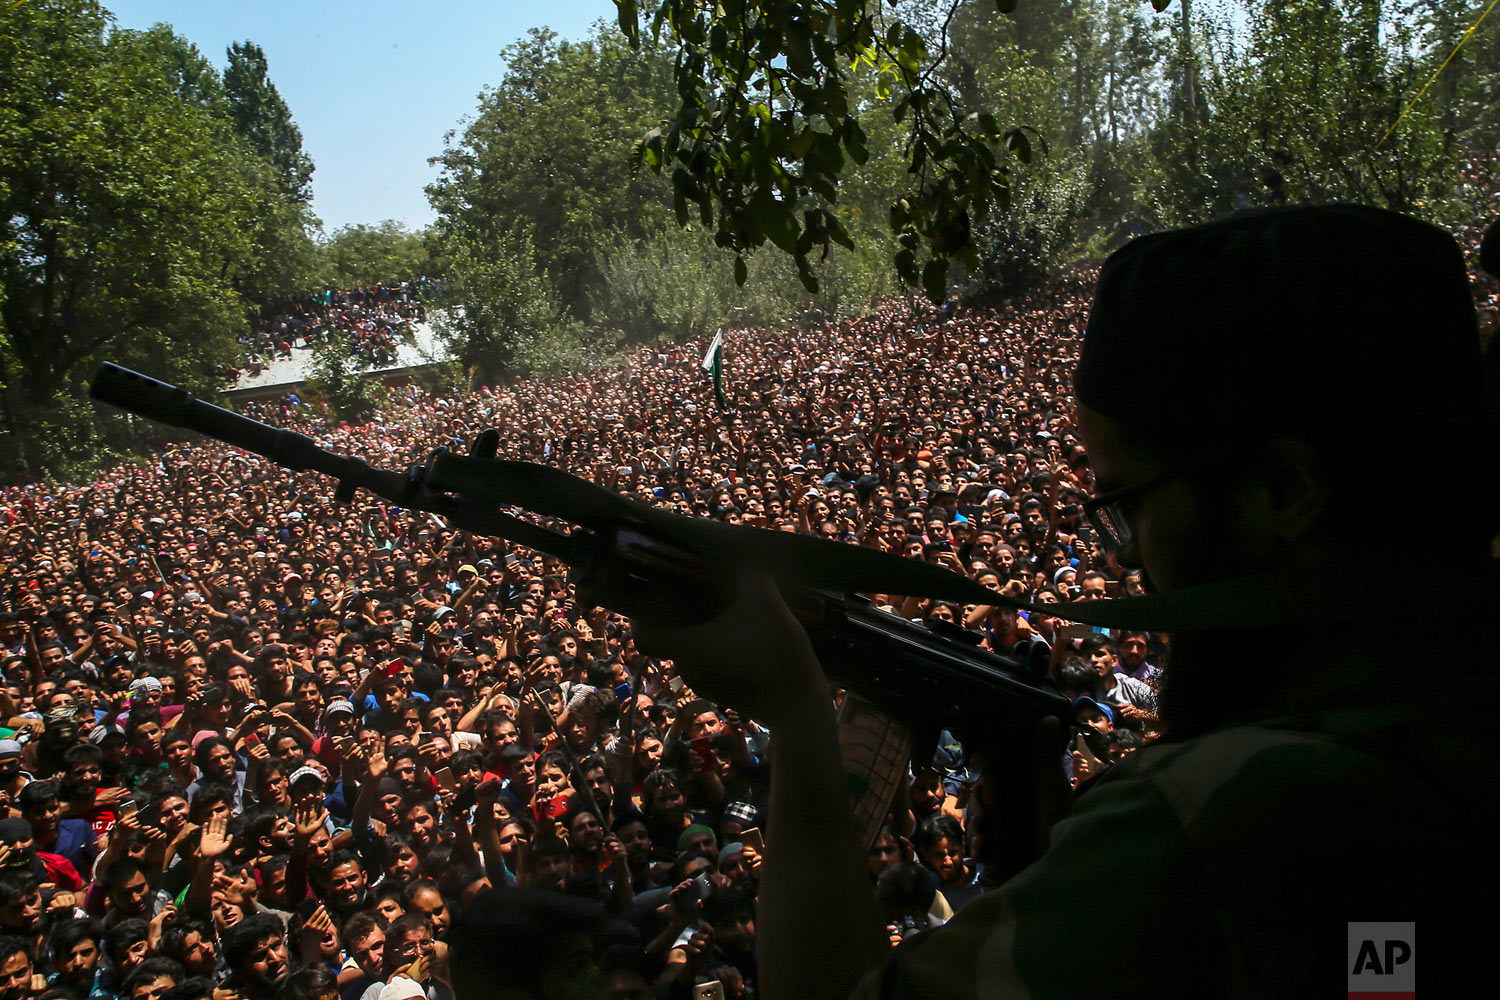  A Kashmiri rebel fires his gun to salute fallen comrades during their joint funeral in Malikgund village, south of Srinagar, Indian controlled Kashmir, Saturday, Aug. 4, 2018. At rebels and an Indian army soldier were killed in gunbattles in disputed Kashmir, triggering violent protests by residents opposed to Indian rule, officials said Saturday. (AP Photo/Dar Yasin) 